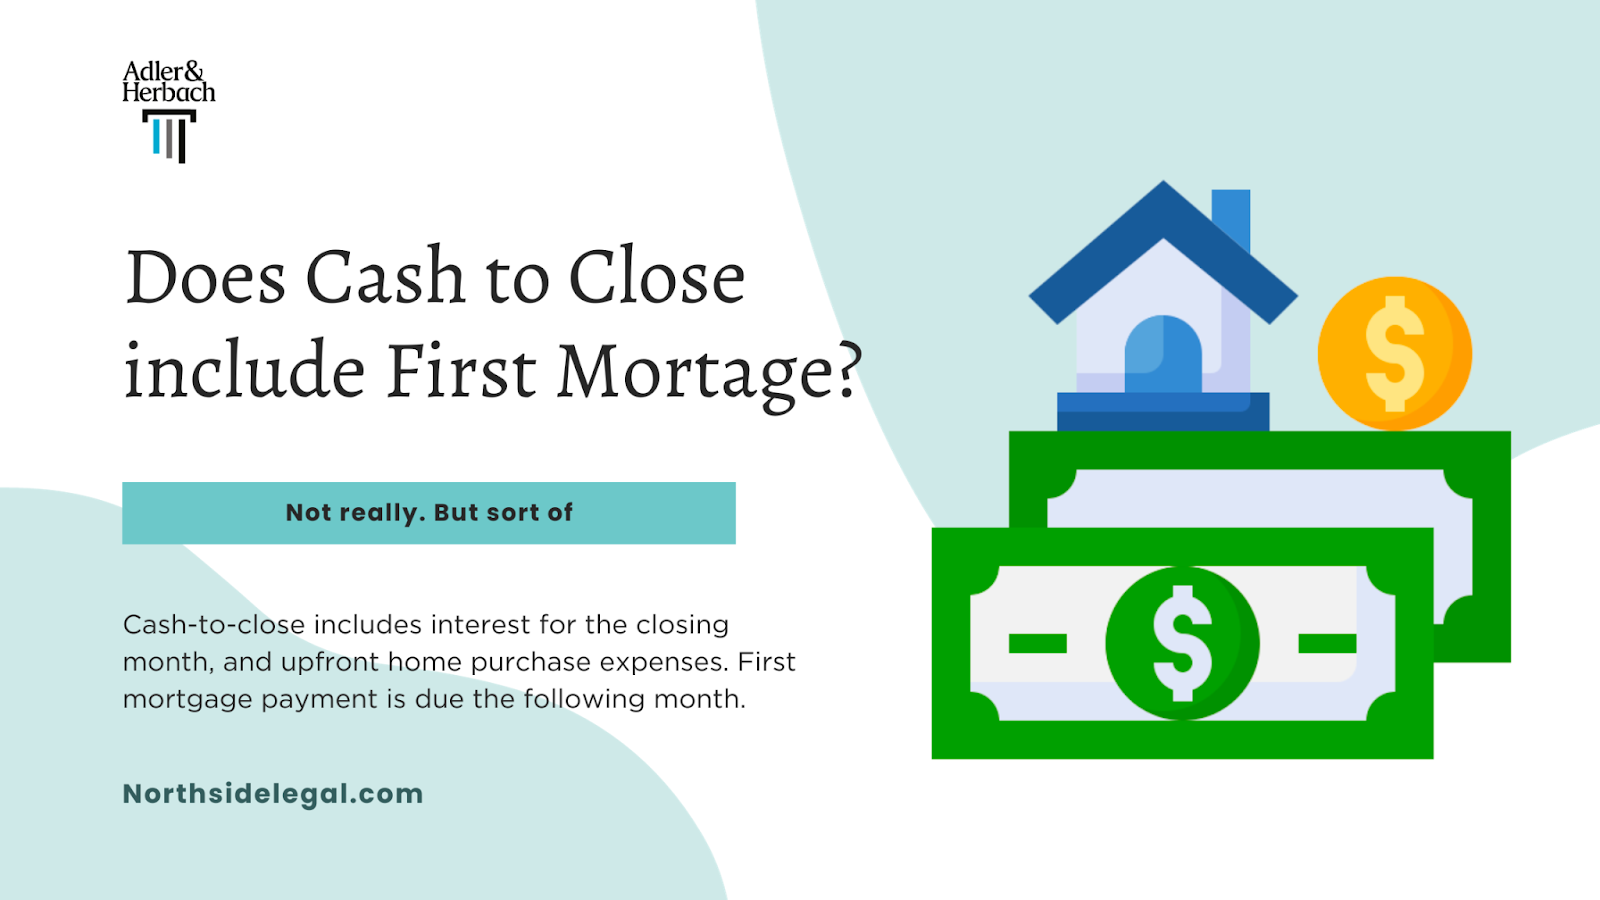 Does cash to close include first mortgage payment?